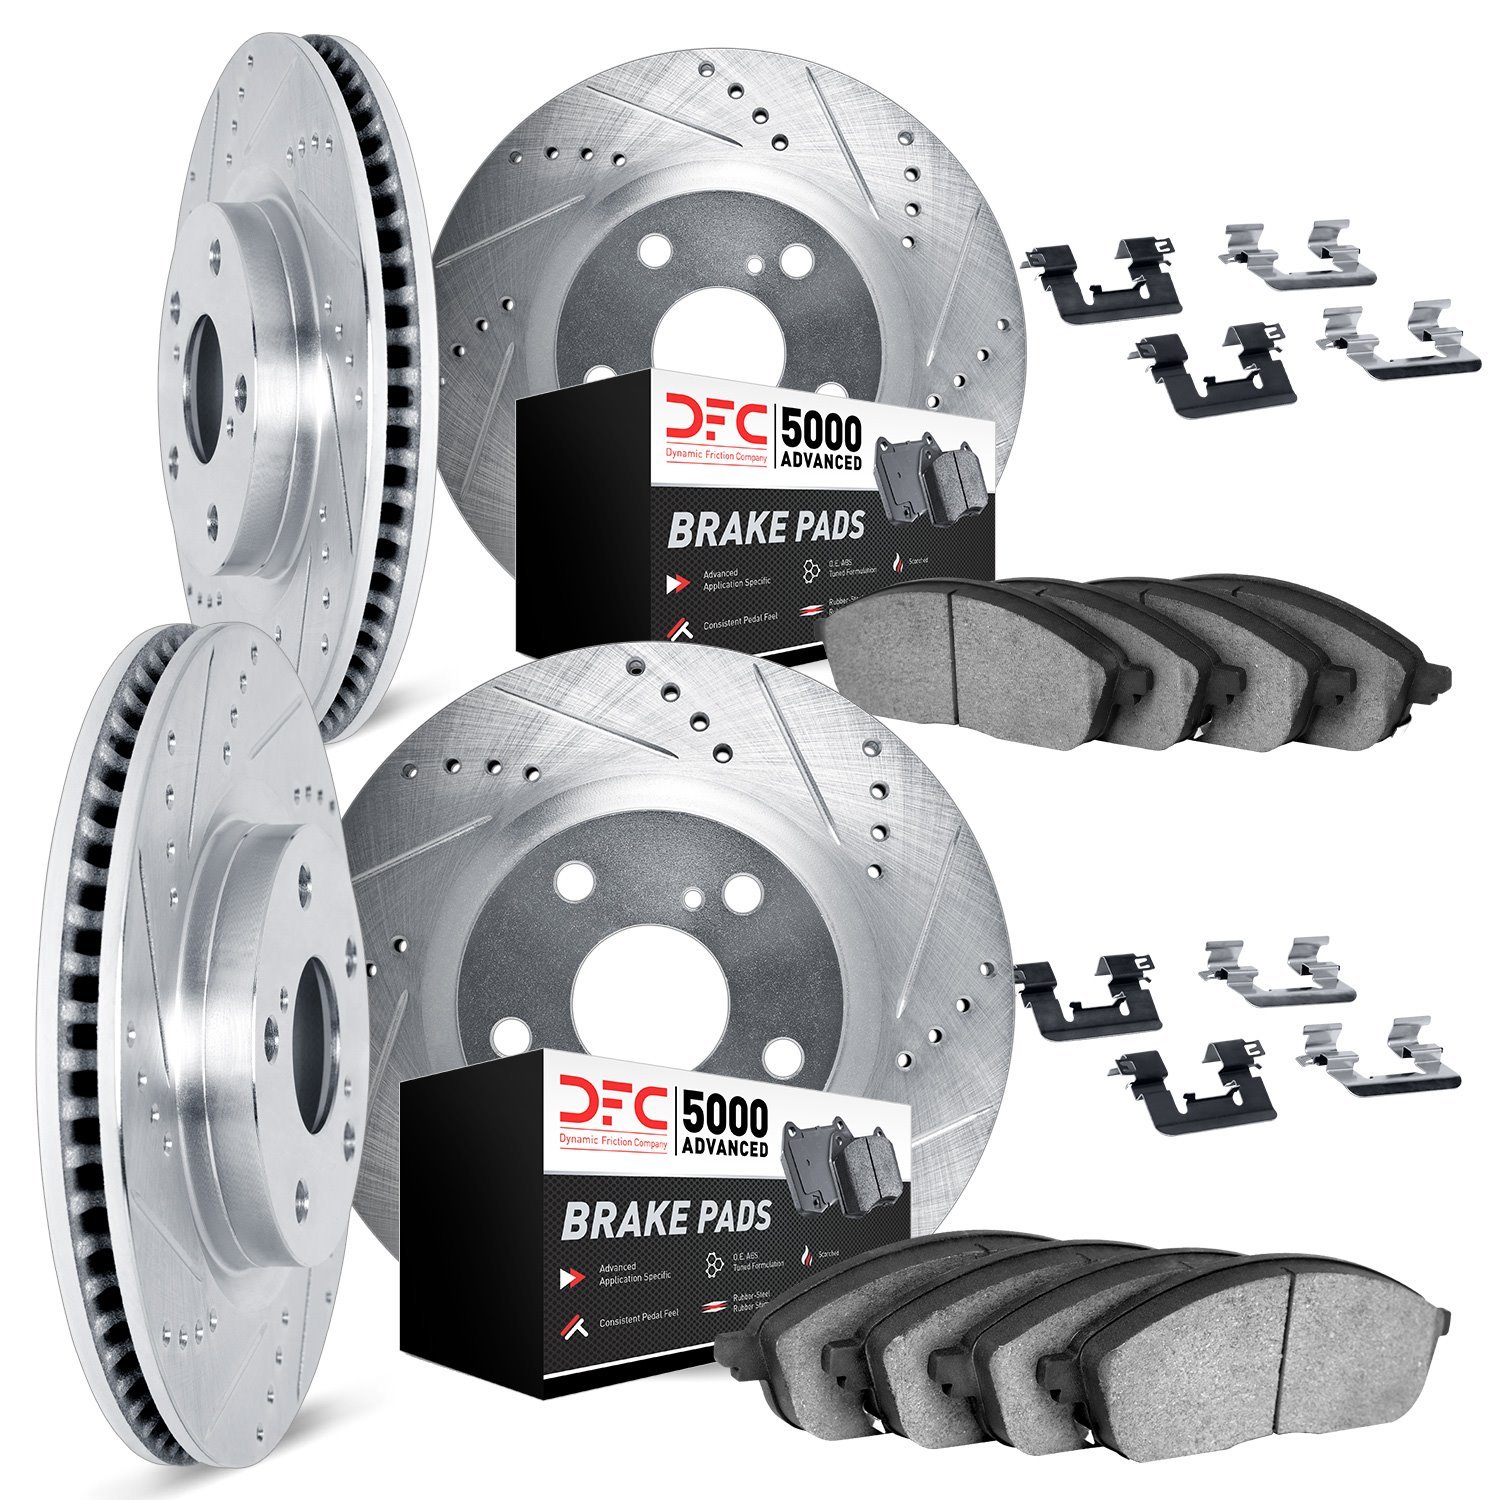 7514-67073 Drilled/Slotted Brake Rotors w/5000 Advanced Brake Pads Kit & Hardware [Silver], Fits Select Infiniti/Nissan, Positio